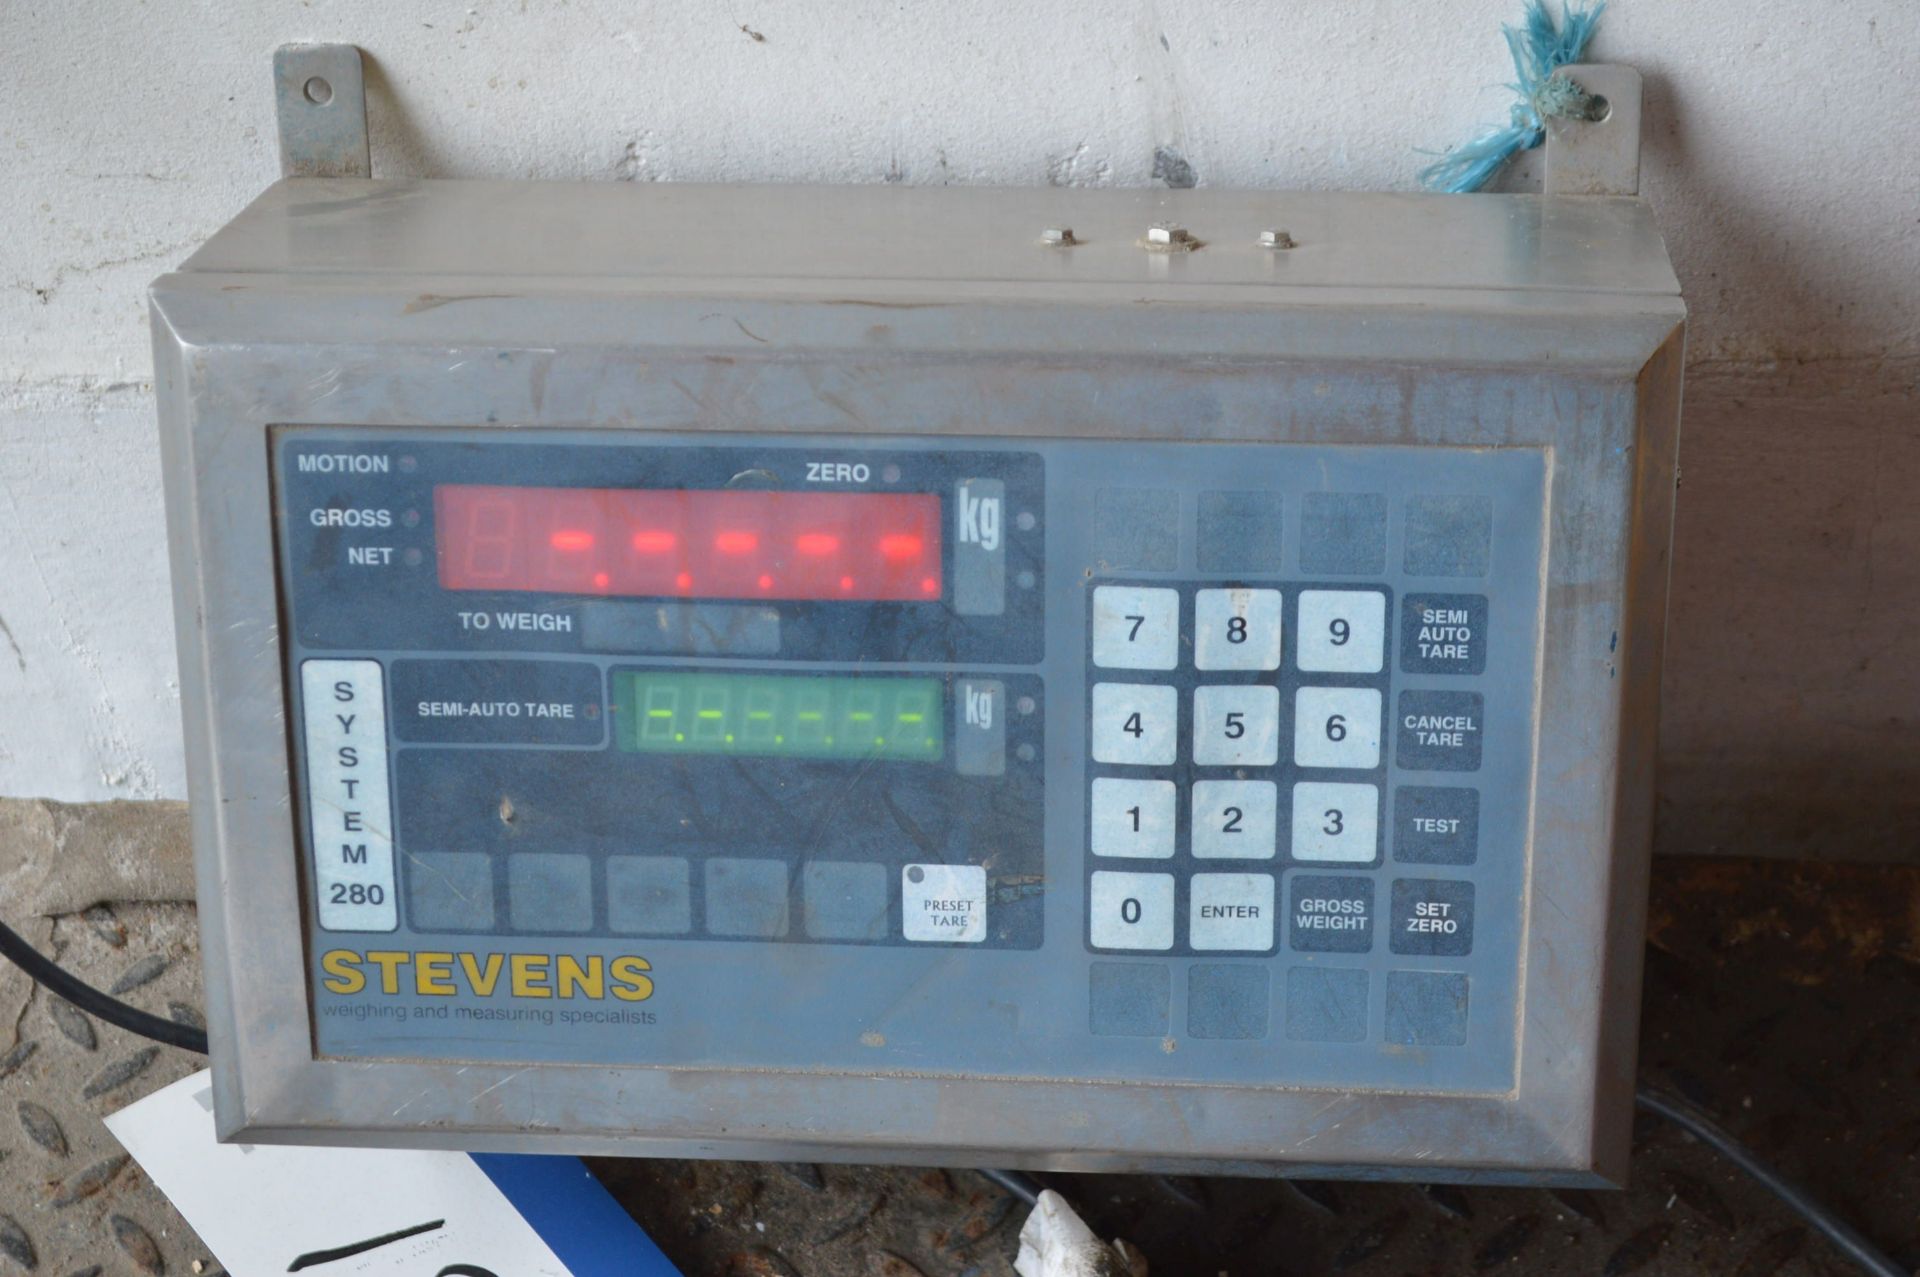 Loadcell Platform Weighing Scale, 1500mm x 1500mm, with Stevens system 280 digital read out - Image 2 of 3